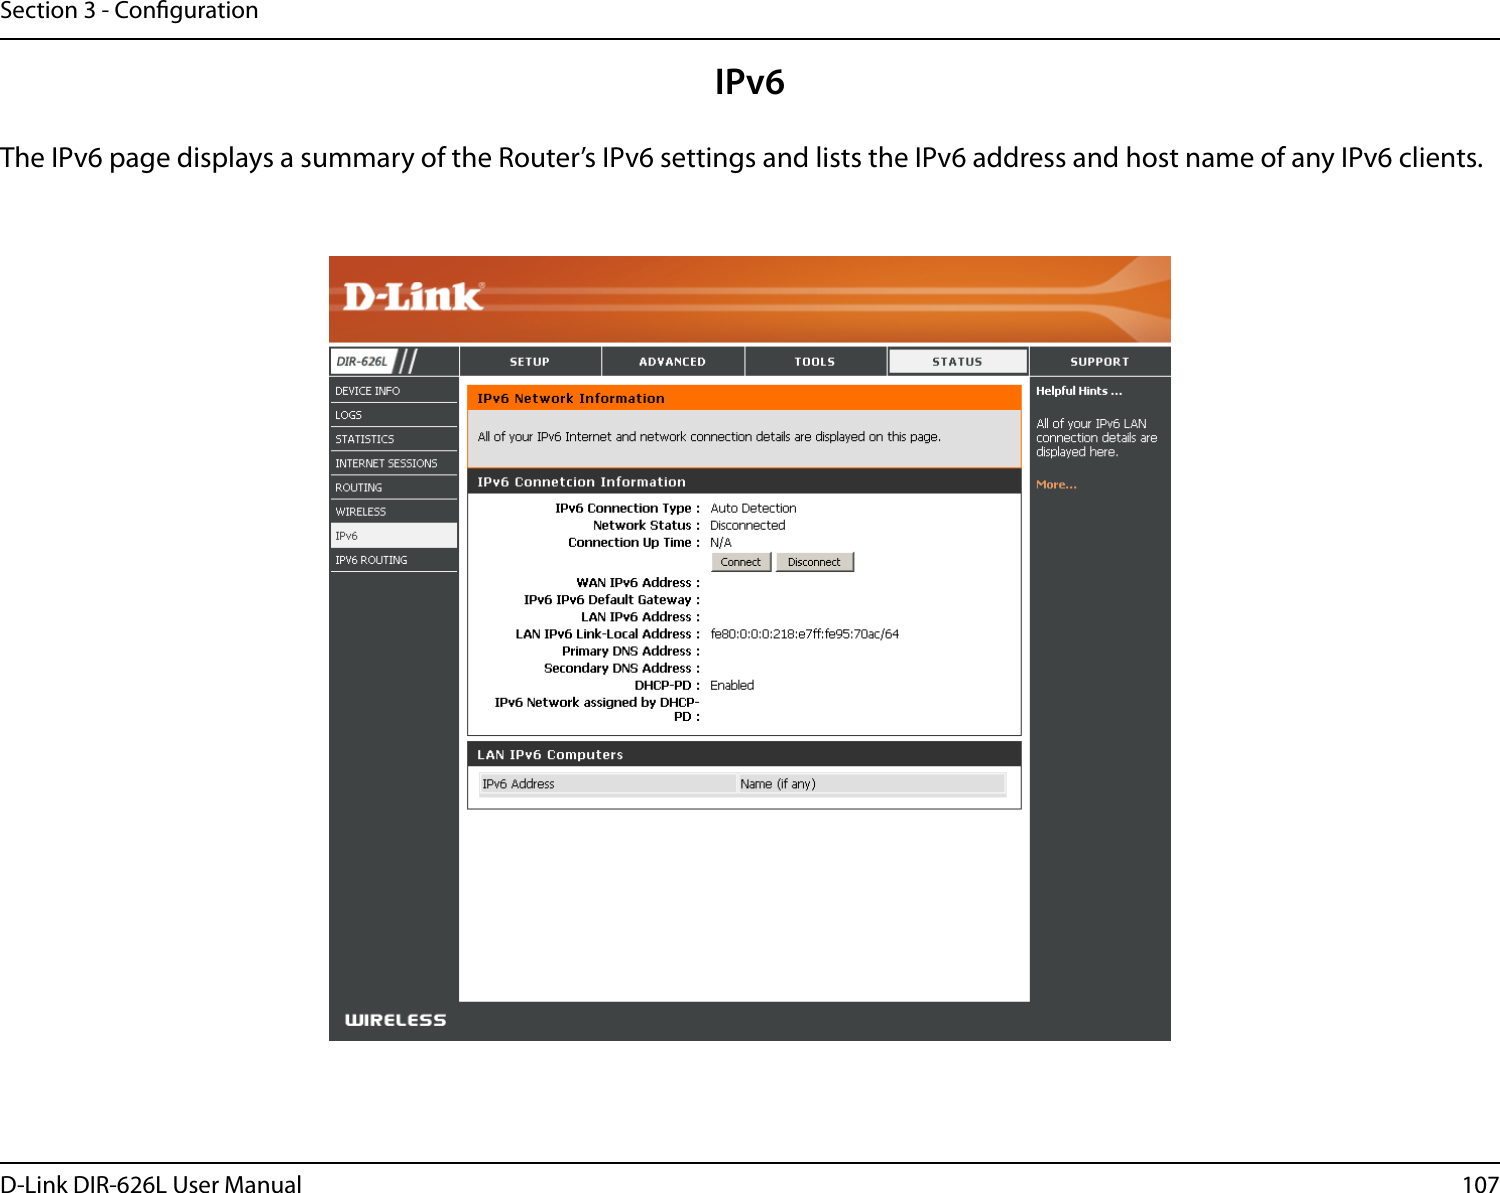 107D-Link DIR-626L User ManualSection 3 - CongurationIPv6The IPv6 page displays a summary of the Router’s IPv6 settings and lists the IPv6 address and host name of any IPv6 clients. 